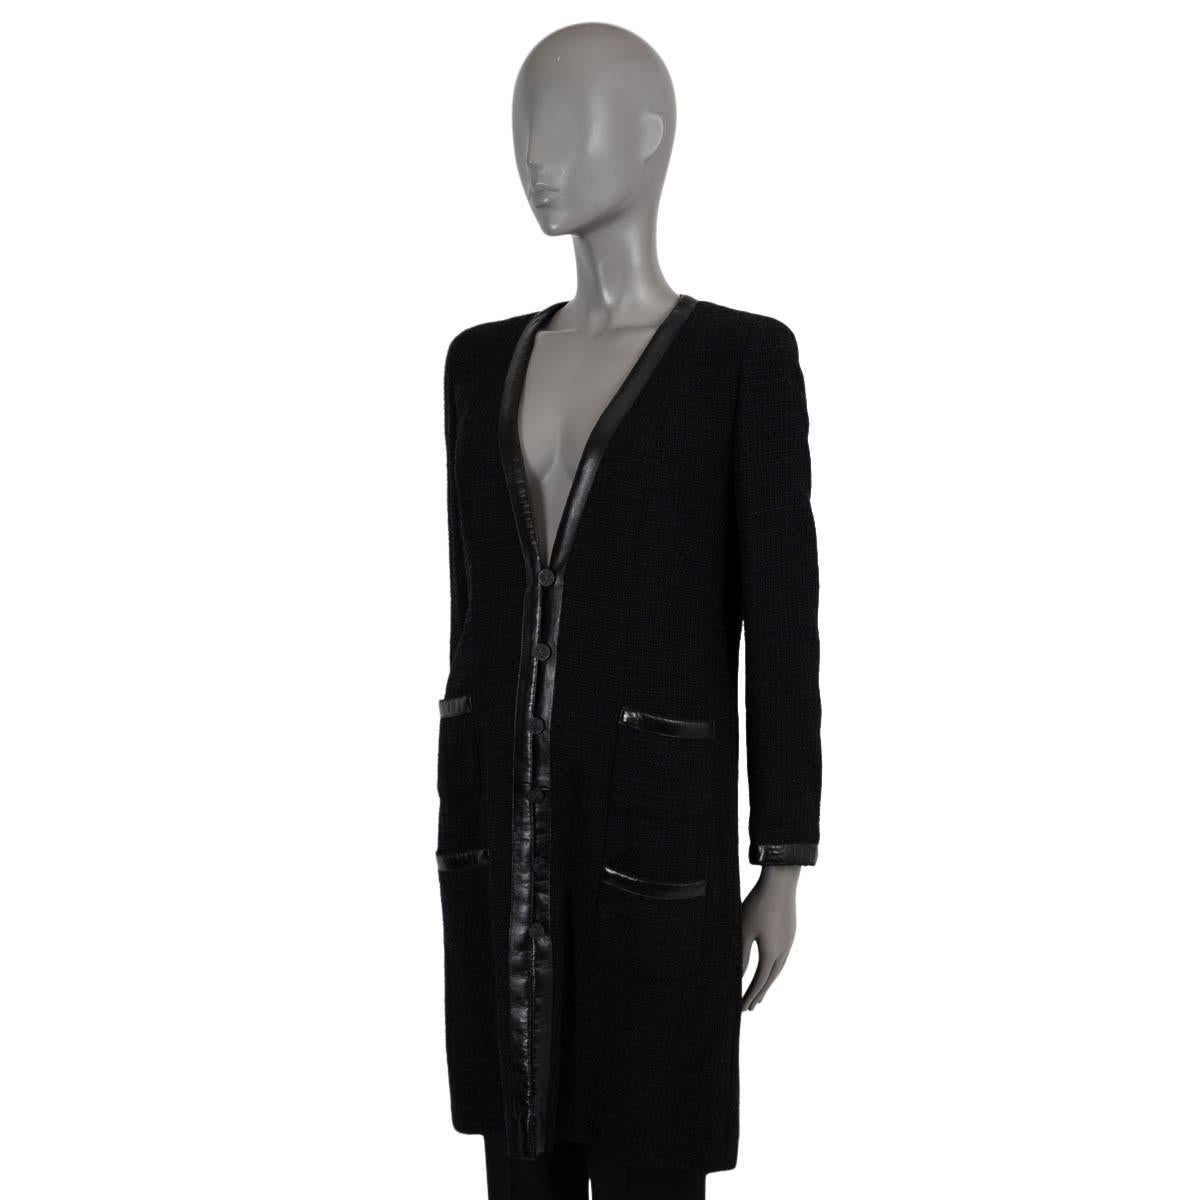 100% authentic Chanel tweed coat in black polyamide (64%), cotton (24%), rayon (7%) and linen (5%). Features leather trims along the V-neck, cuffs and pockets. Closes with black CC buttons on the front and is lined in silk (100%). Has been worn and